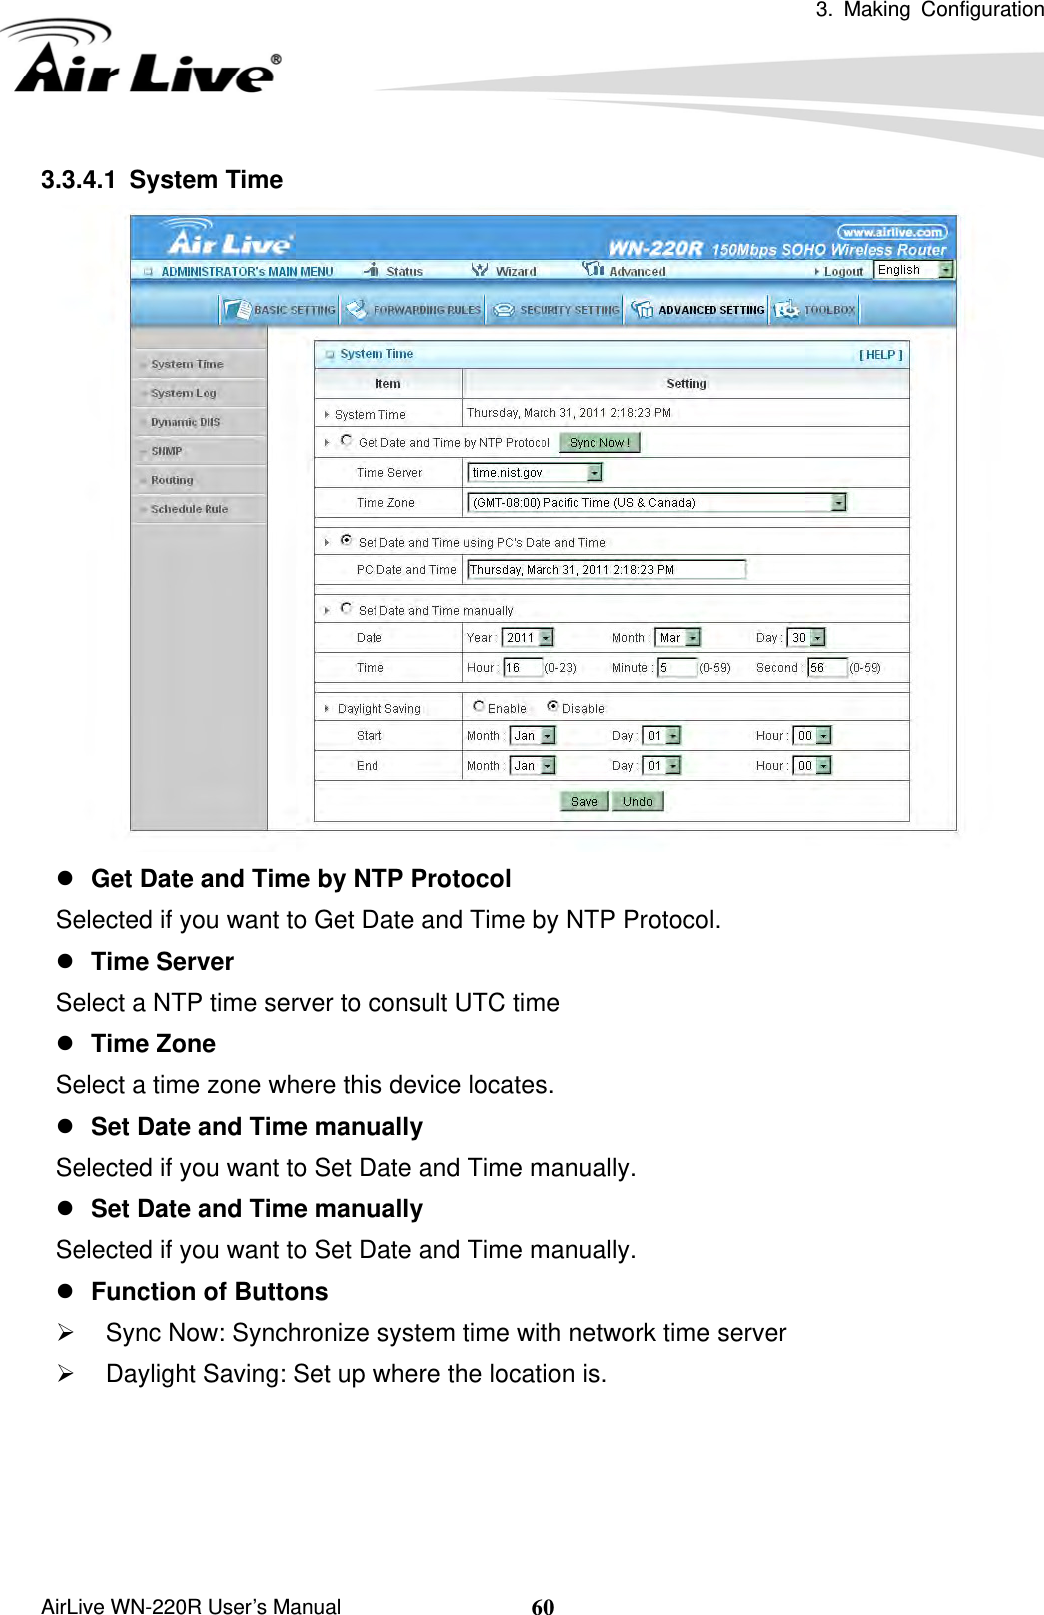  3. Making Configuration       AirLive WN-220R User’s Manual  603.3.4.1 System Time  z Get Date and Time by NTP Protocol Selected if you want to Get Date and Time by NTP Protocol.   z Time Server Select a NTP time server to consult UTC time   z Time Zone Select a time zone where this device locates.   z Set Date and Time manually Selected if you want to Set Date and Time manually.   z Set Date and Time manually Selected if you want to Set Date and Time manually. z Function of Buttons ¾  Sync Now: Synchronize system time with network time server ¾  Daylight Saving: Set up where the location is.     